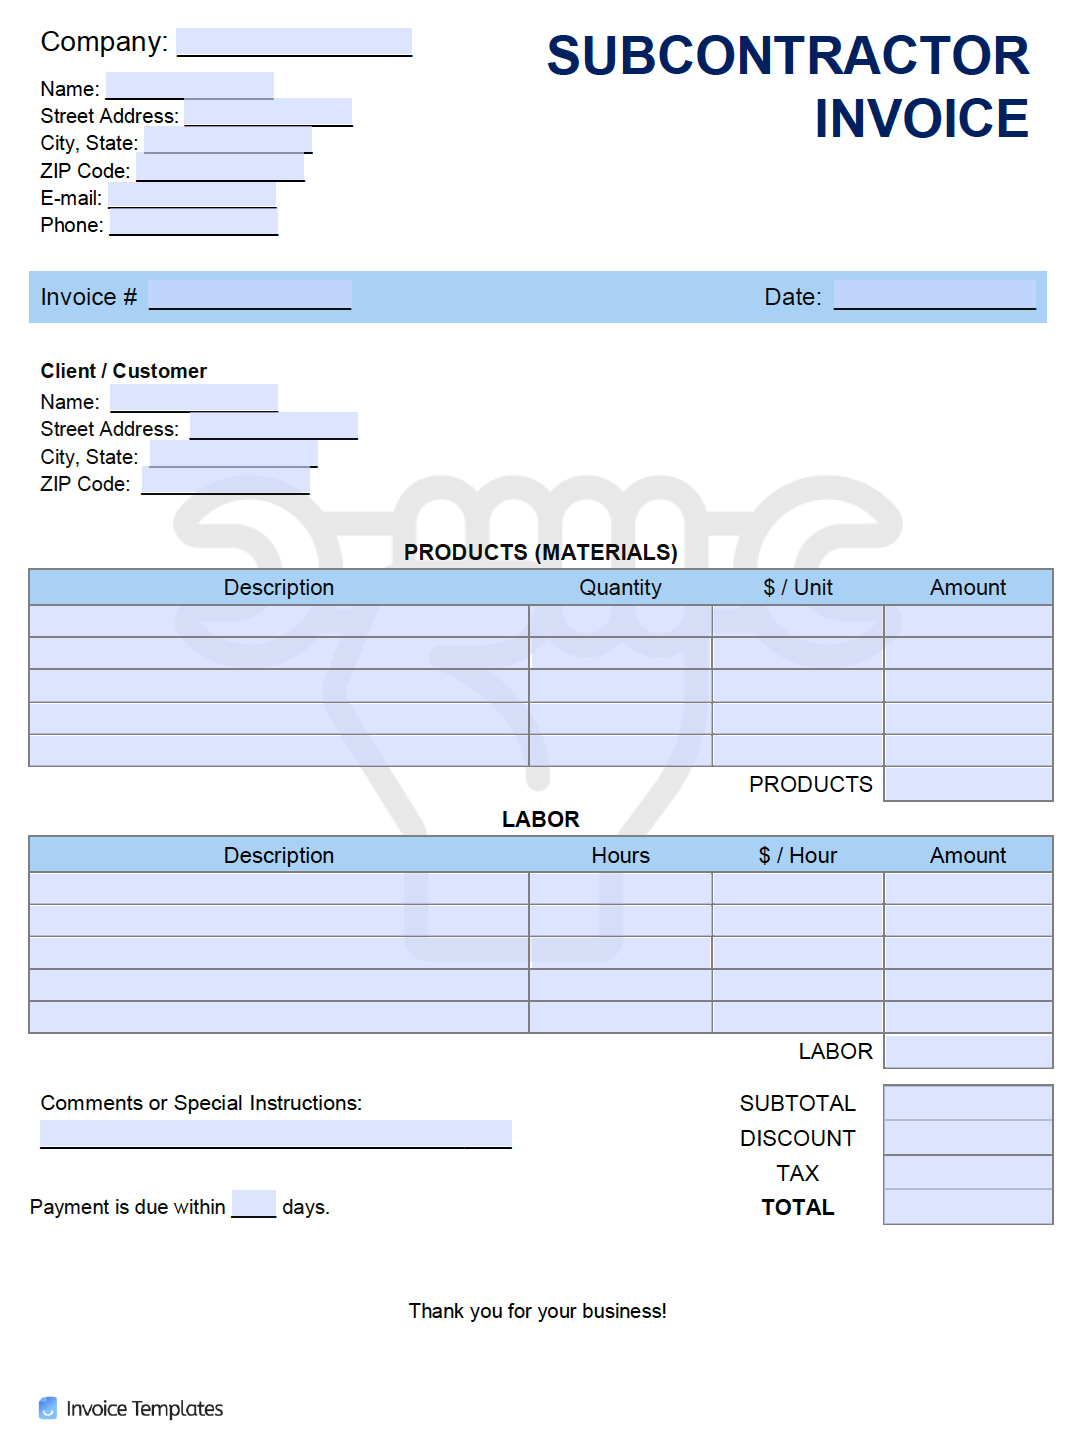 Free Subcontractor Invoice Template  PDF  WORD  EXCEL Inside Contractors Invoices Free Templates